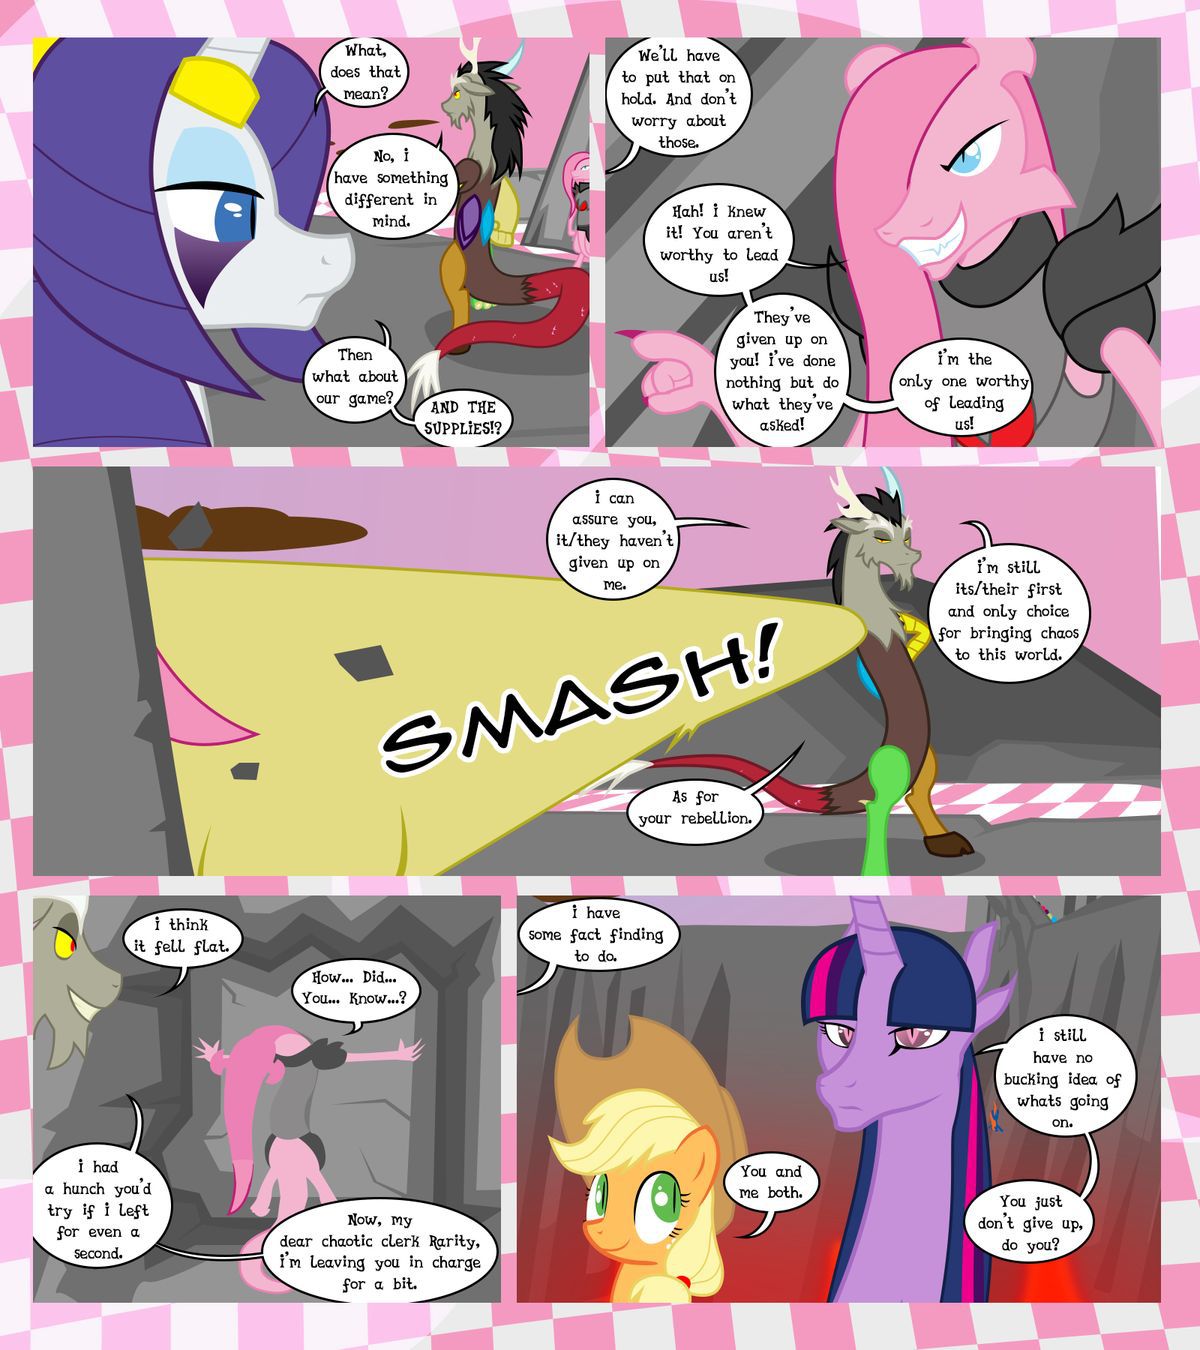 [GatesMcCloud] Cutie Mark Crusaders 10k: Chapter 3 - The Lost (My Little Pony: Friendship is Magic) [English] [Ongoing] 21